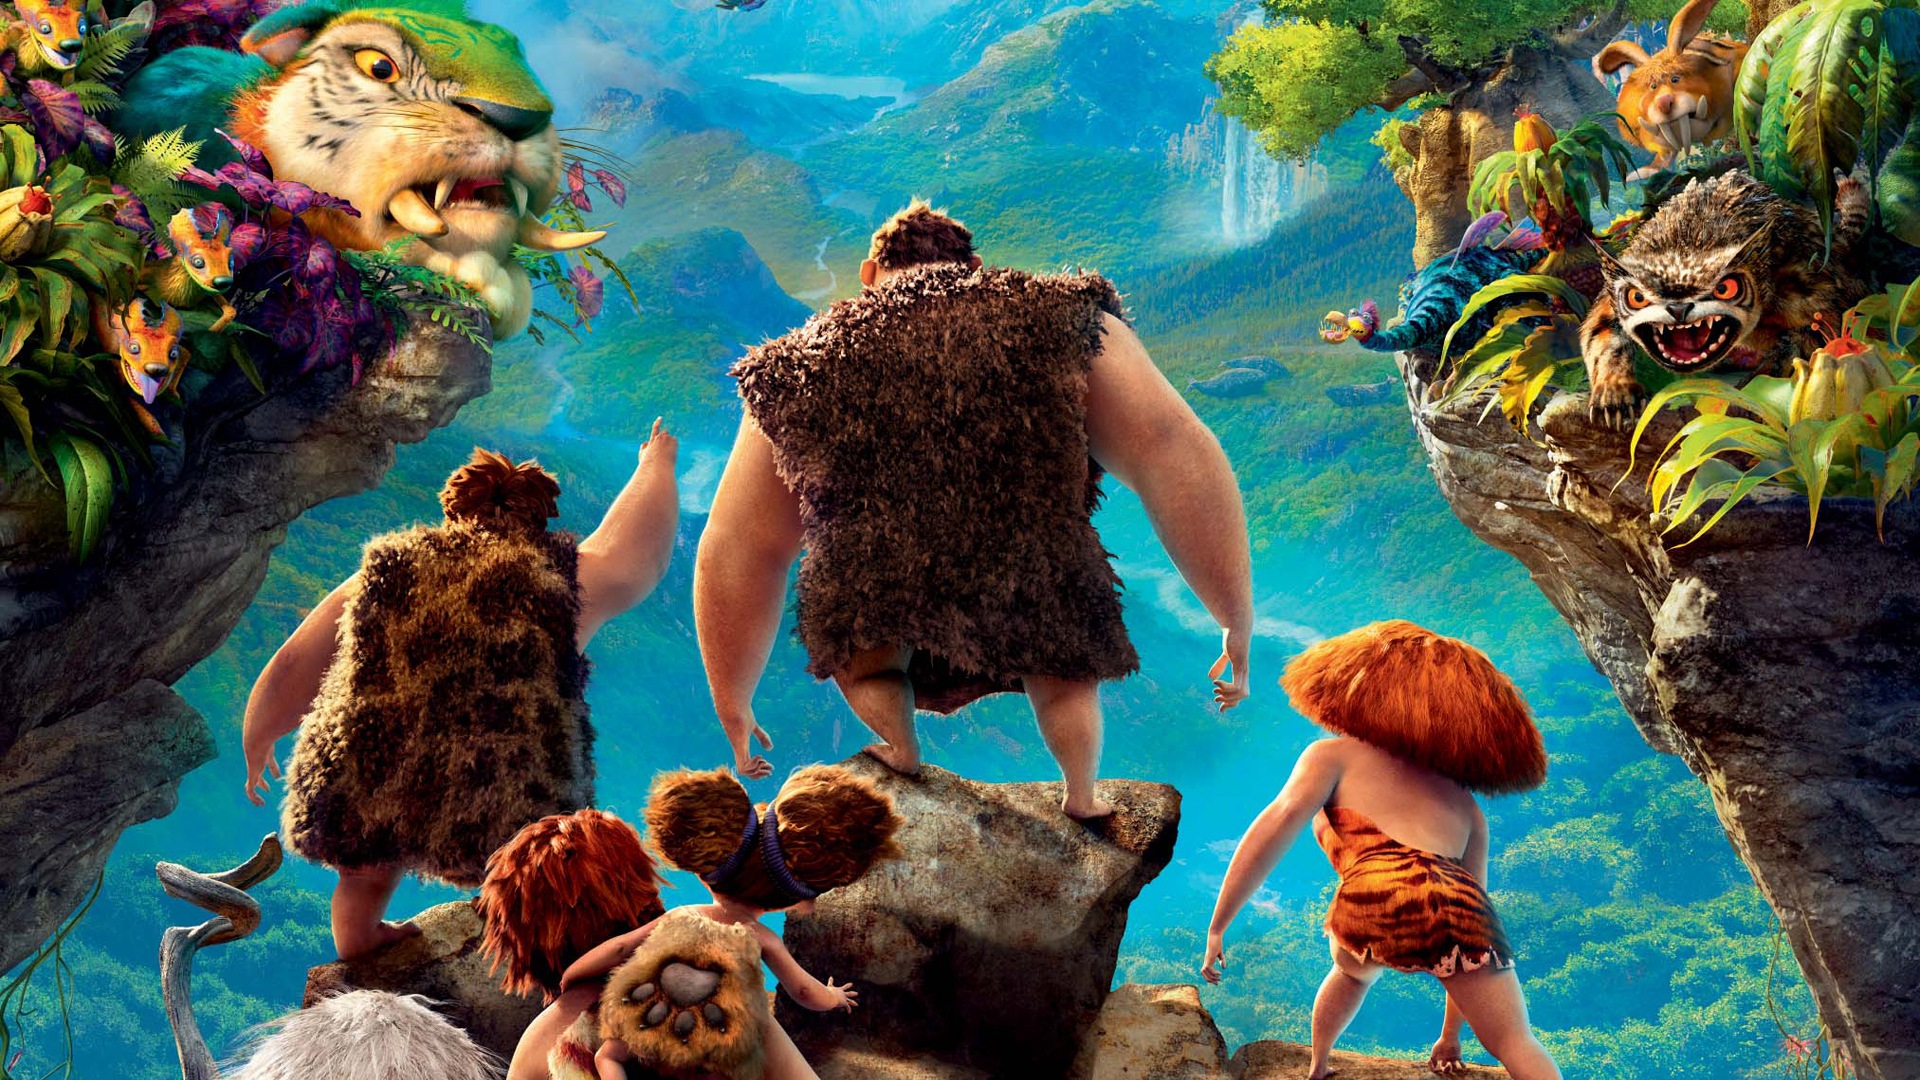 V Croods HD Movie Wallpapers #5 - 1920x1080